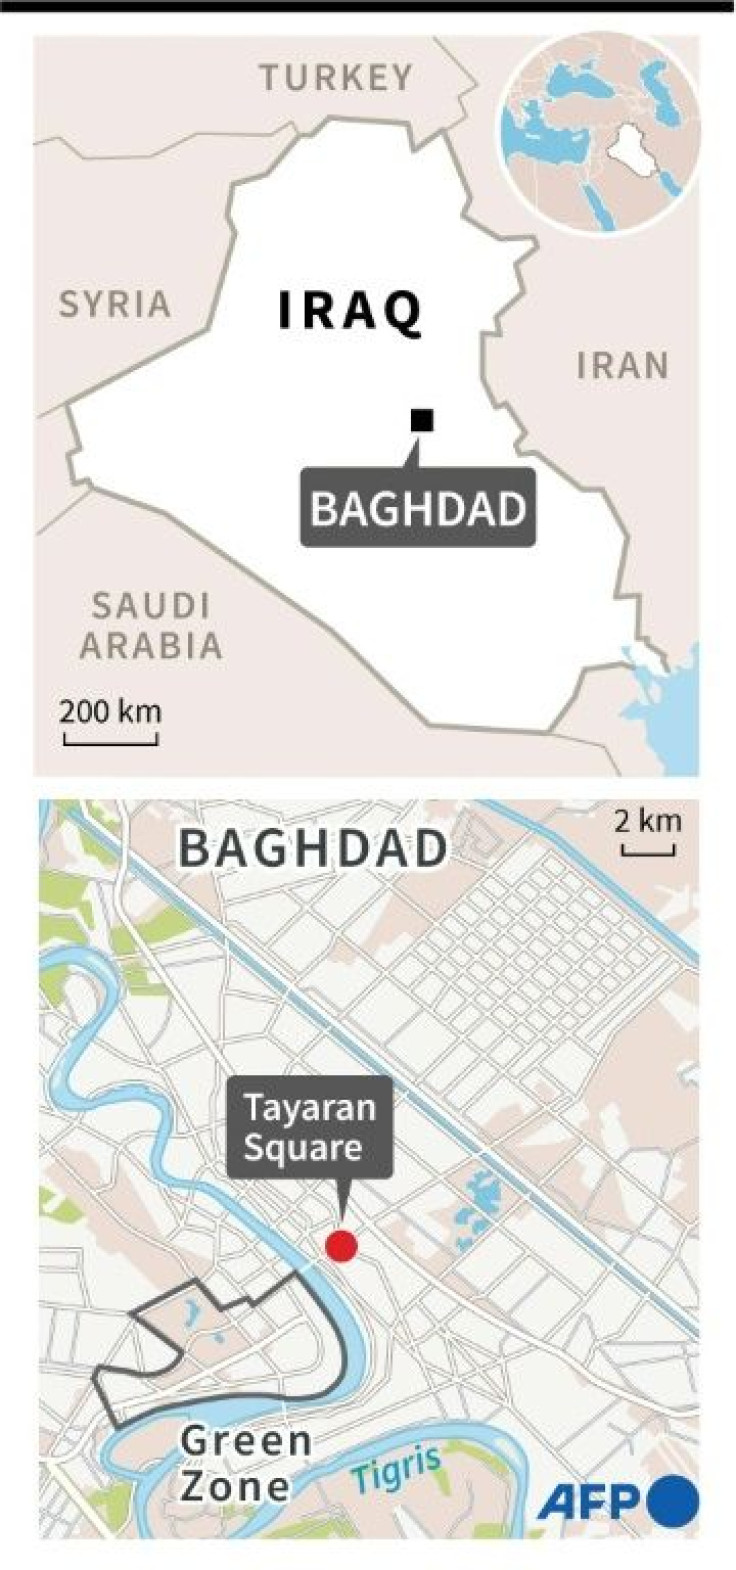 Maps of Iraq and Baghdad locating a Thursday's double suicide attack